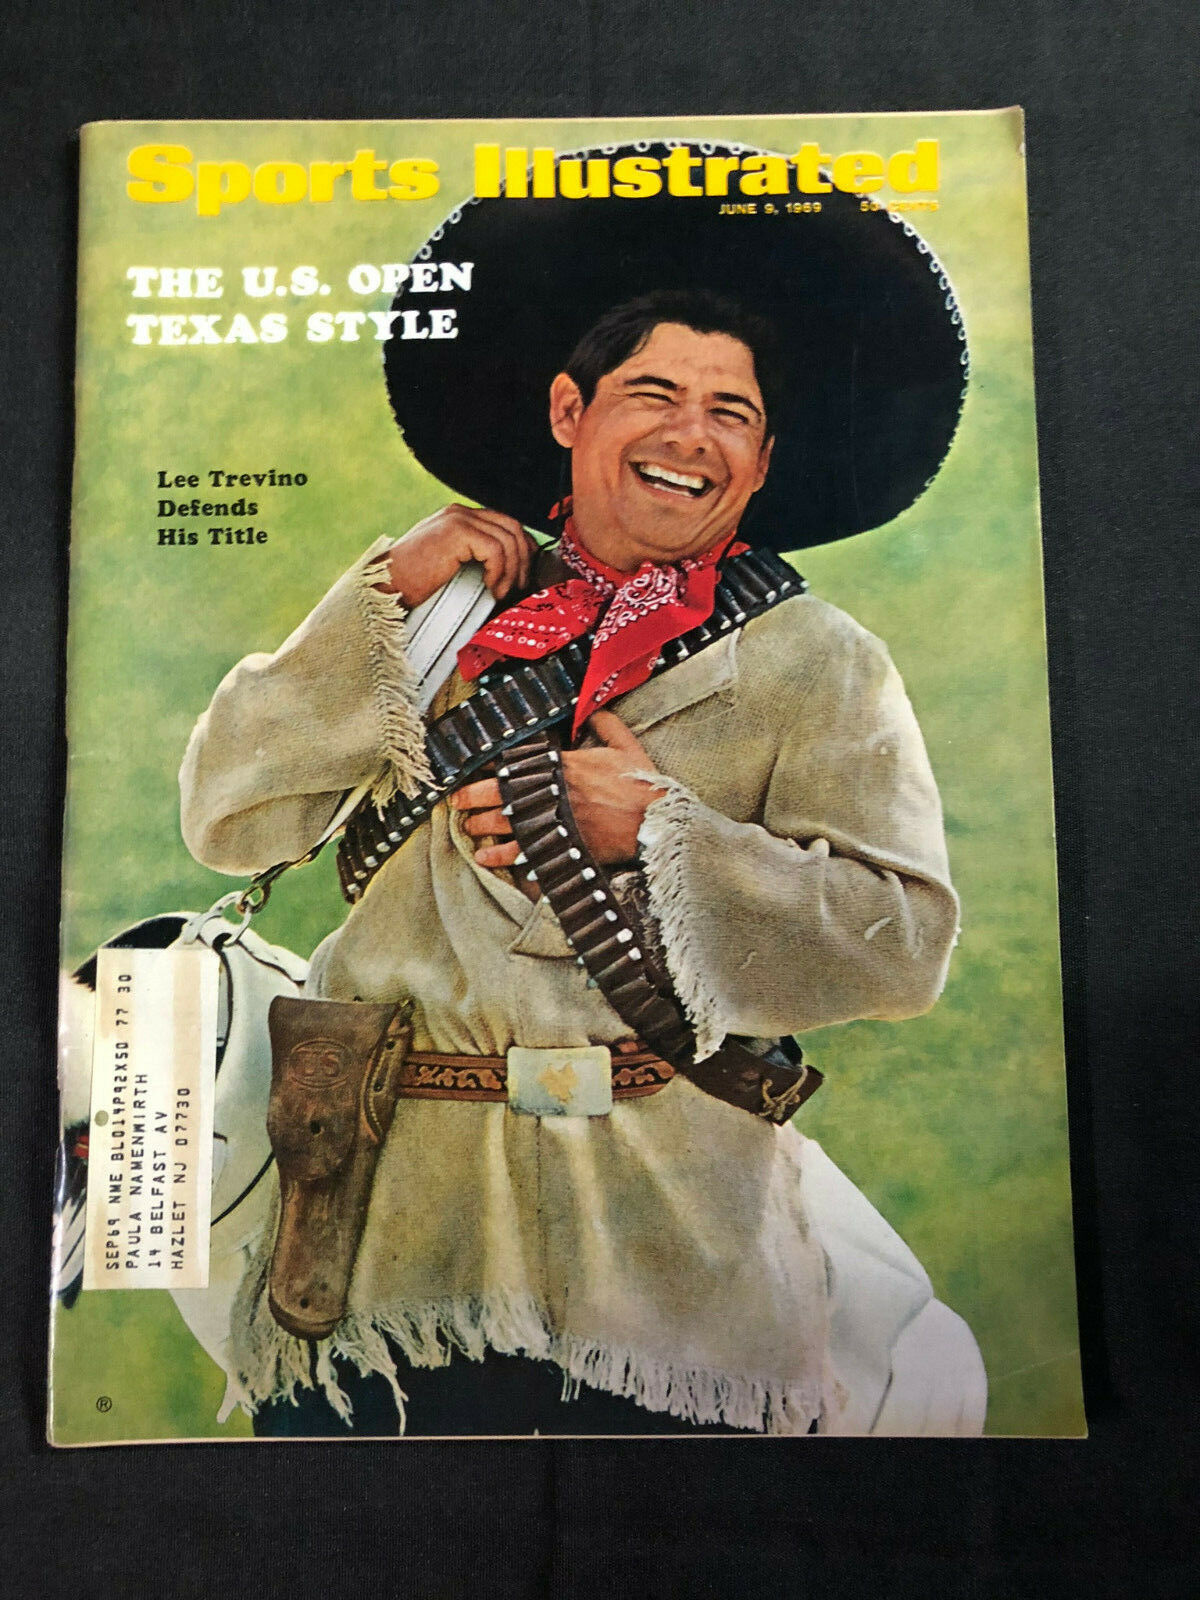 Sports Illustrated June 9, 1969 - the . Open Texas Style - LEE Trevino |  Comic Books - Modern Age / HipComic